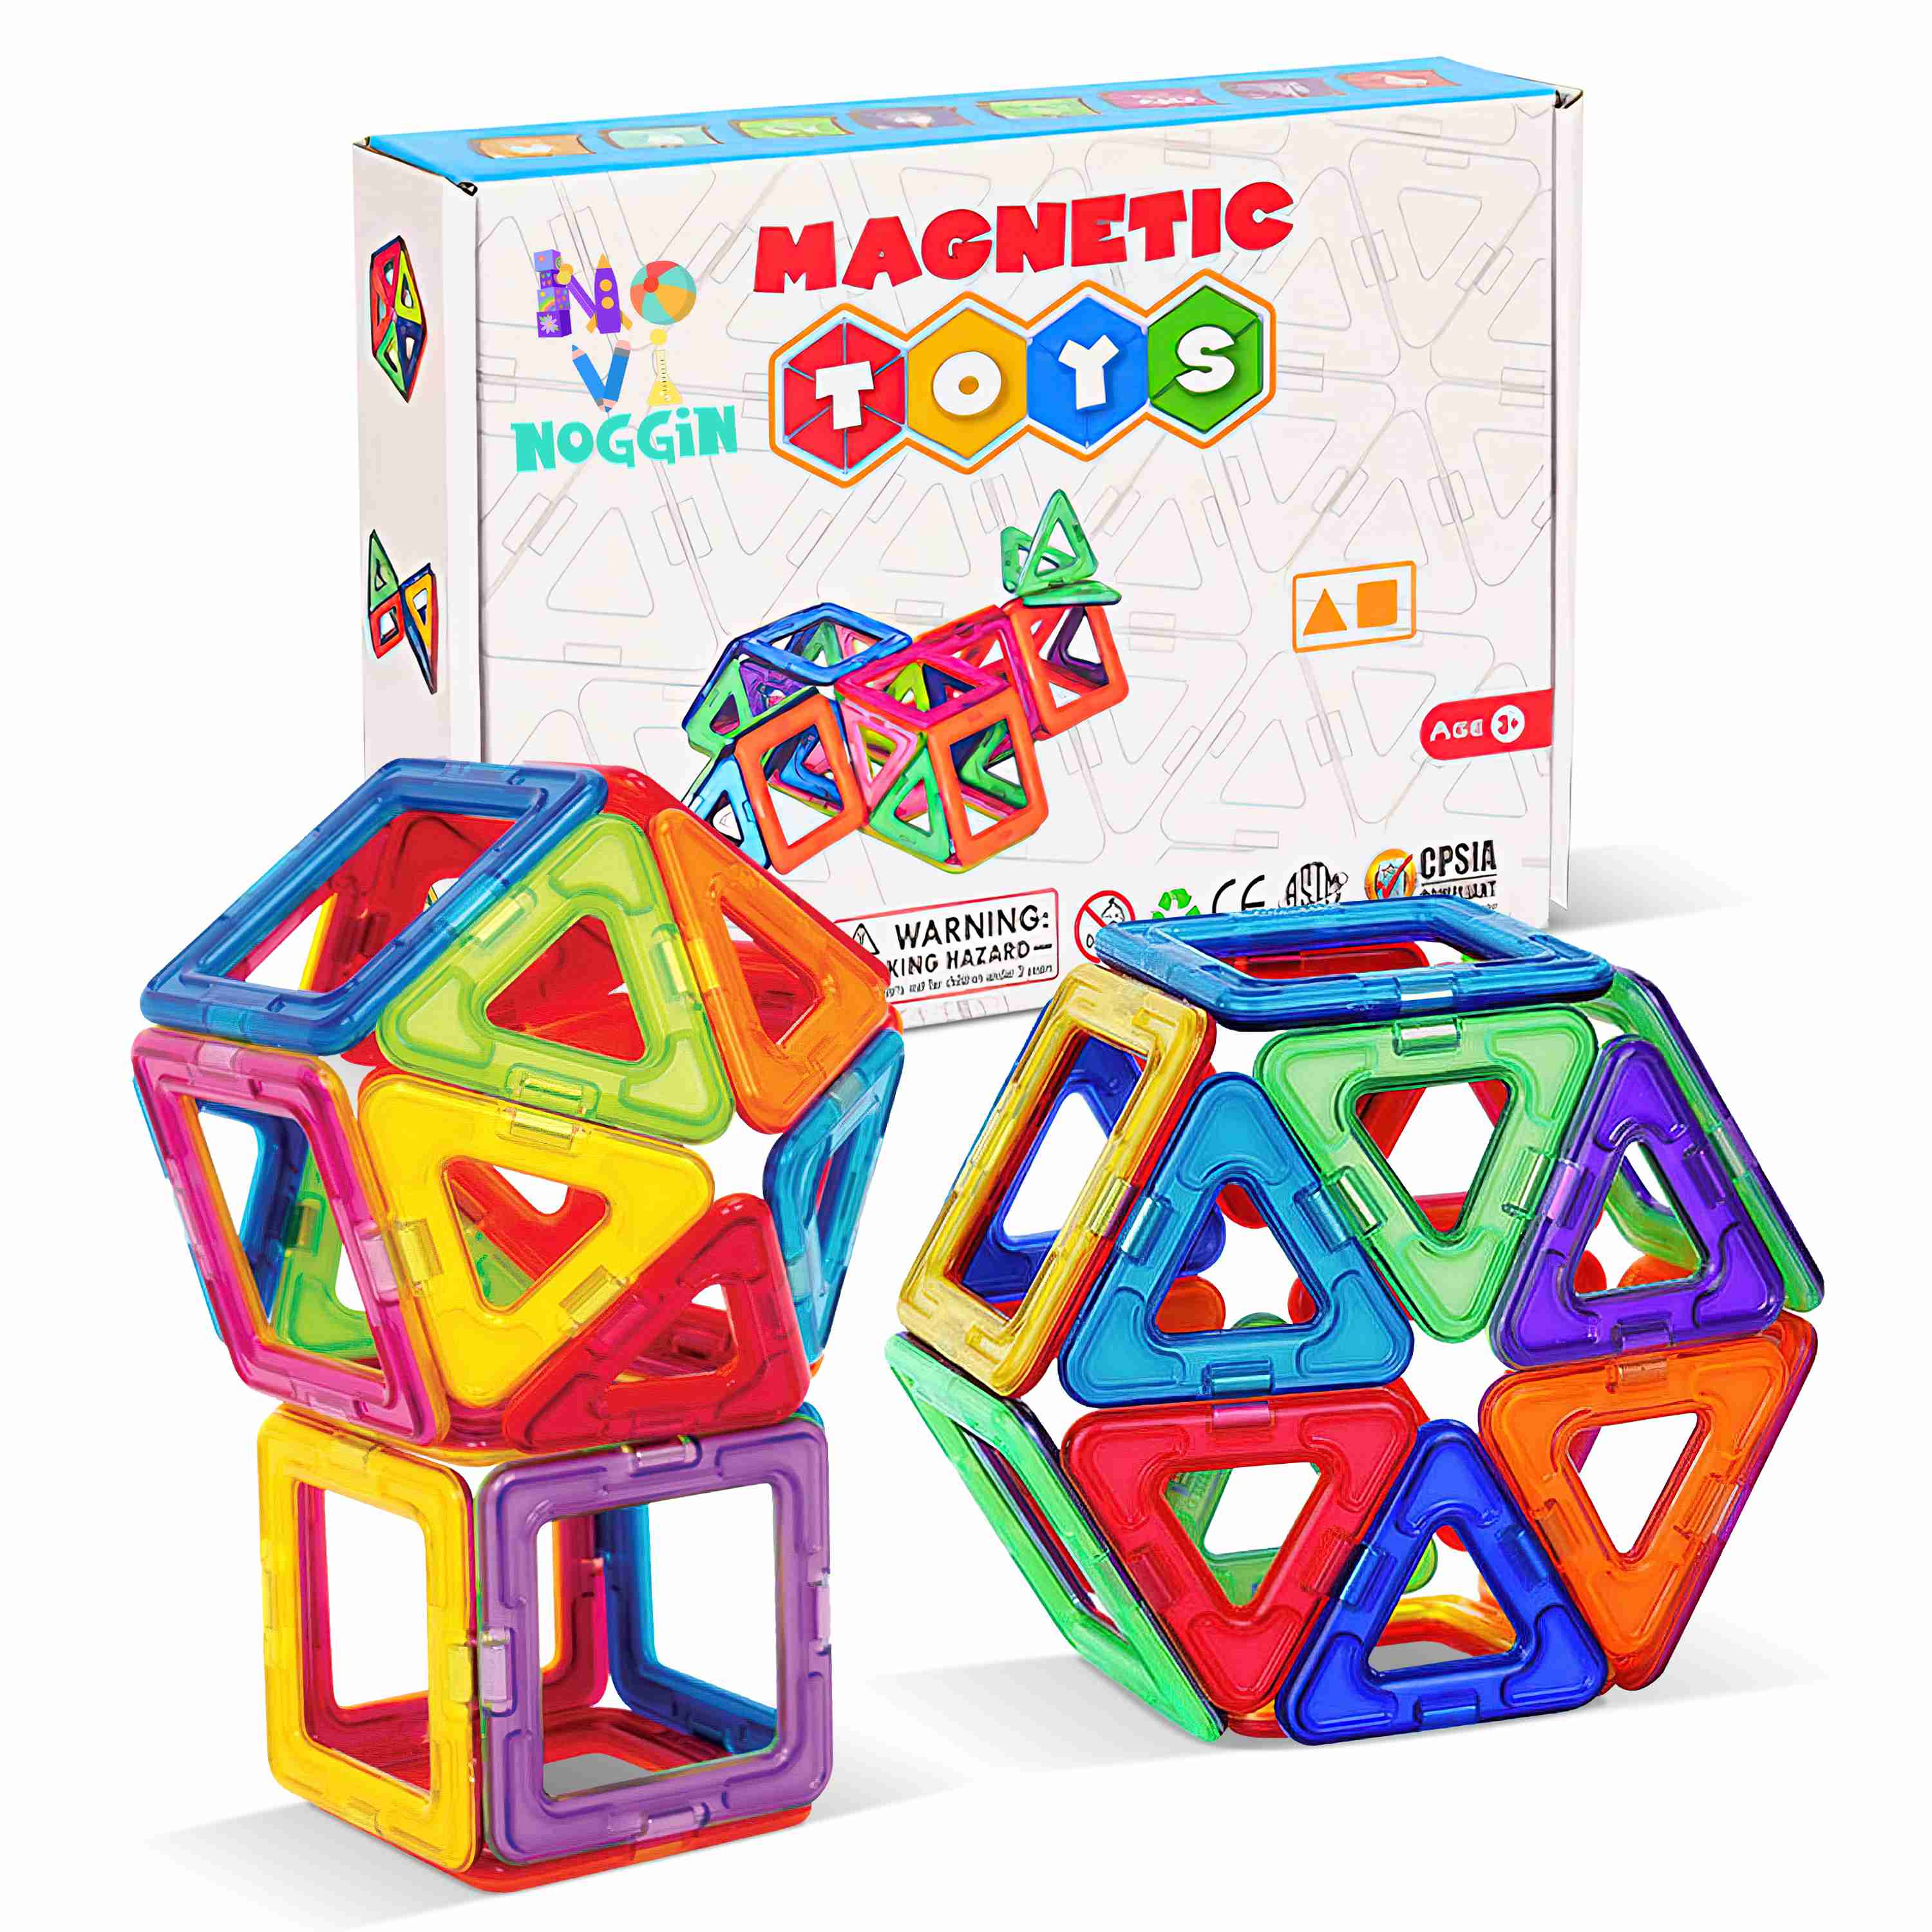 magnets-for-kids-toys-3-year-old-girls-magnetic-tiles-stem with cash back rebate